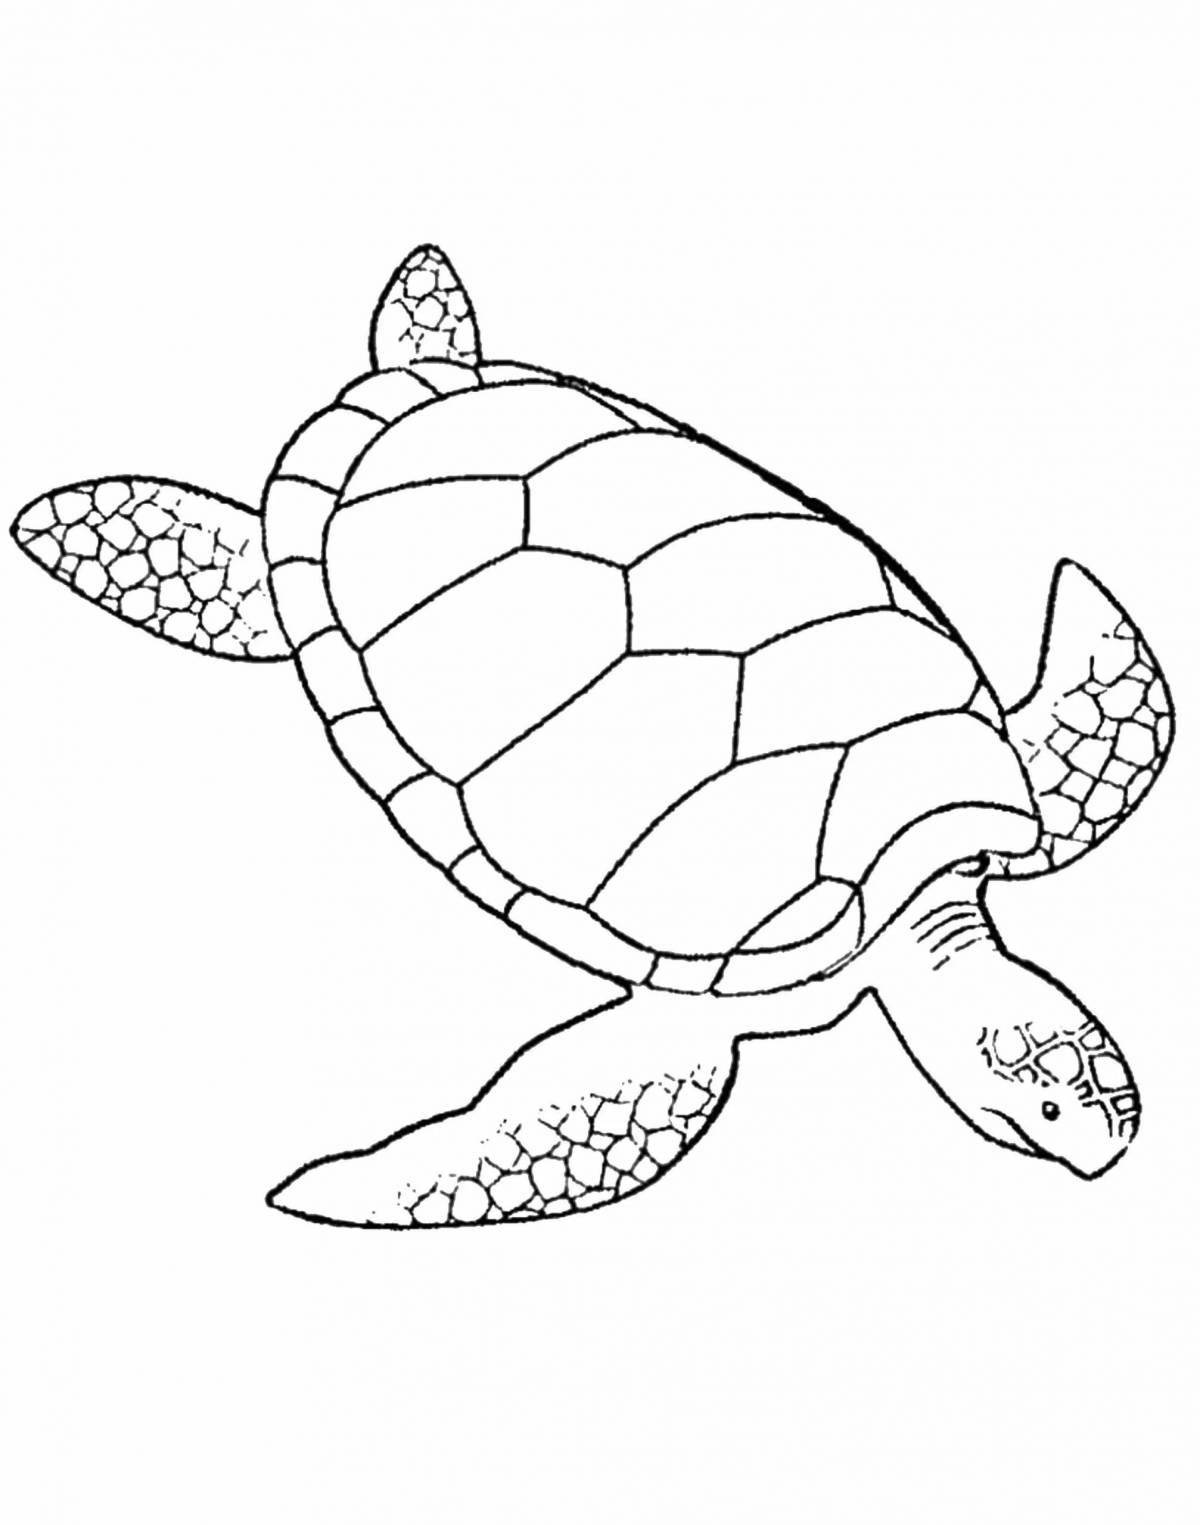 Fabulous sea turtle coloring book for kids